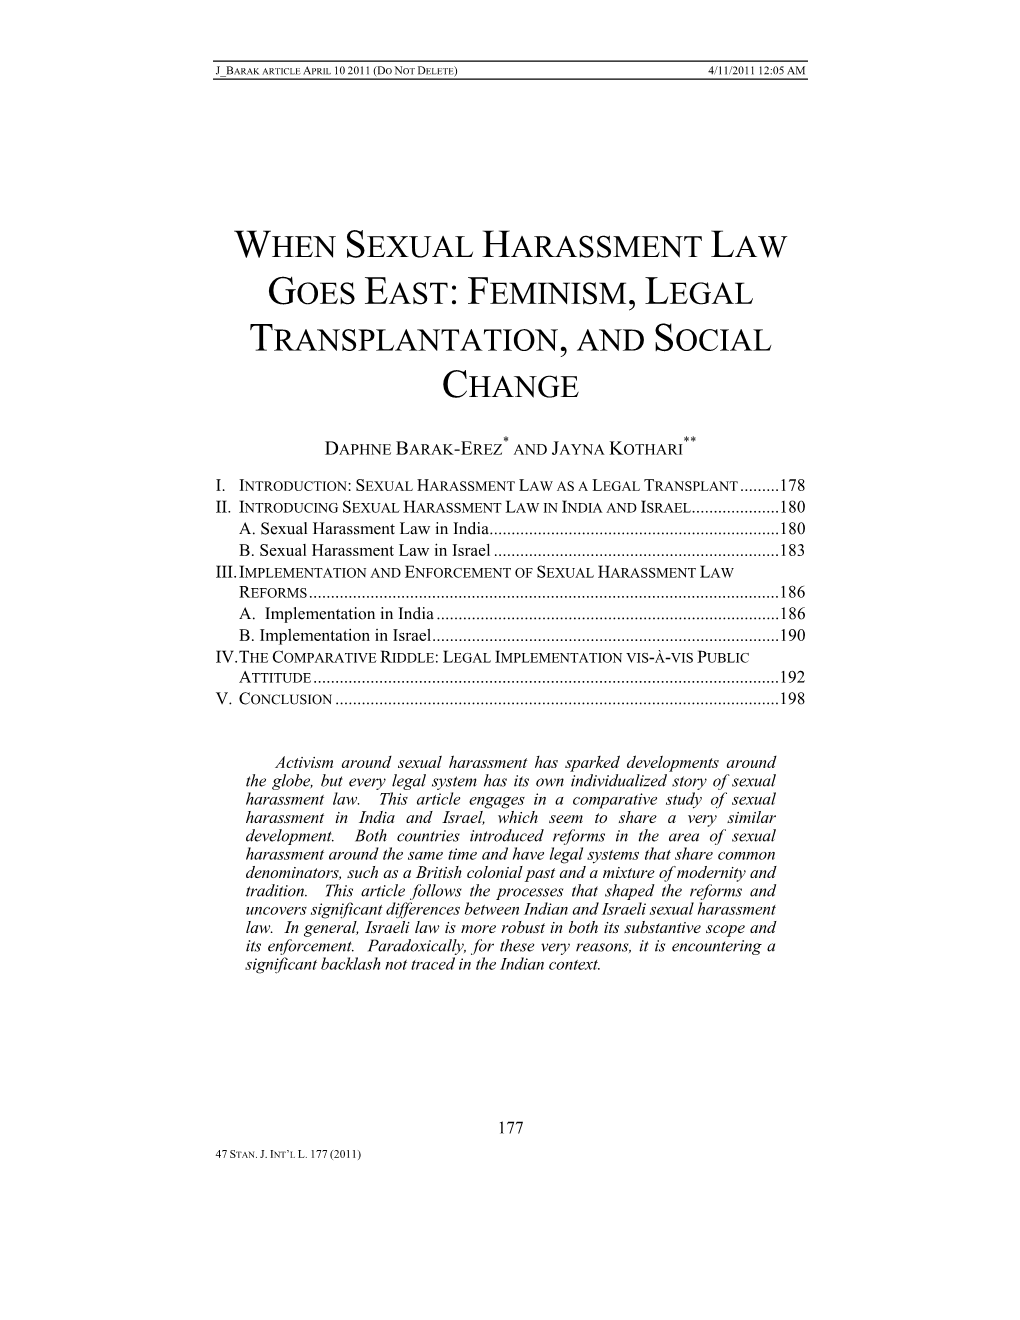 When Sexual Harassment Law Goes East: Feminism, Legal Transplantation, and Social